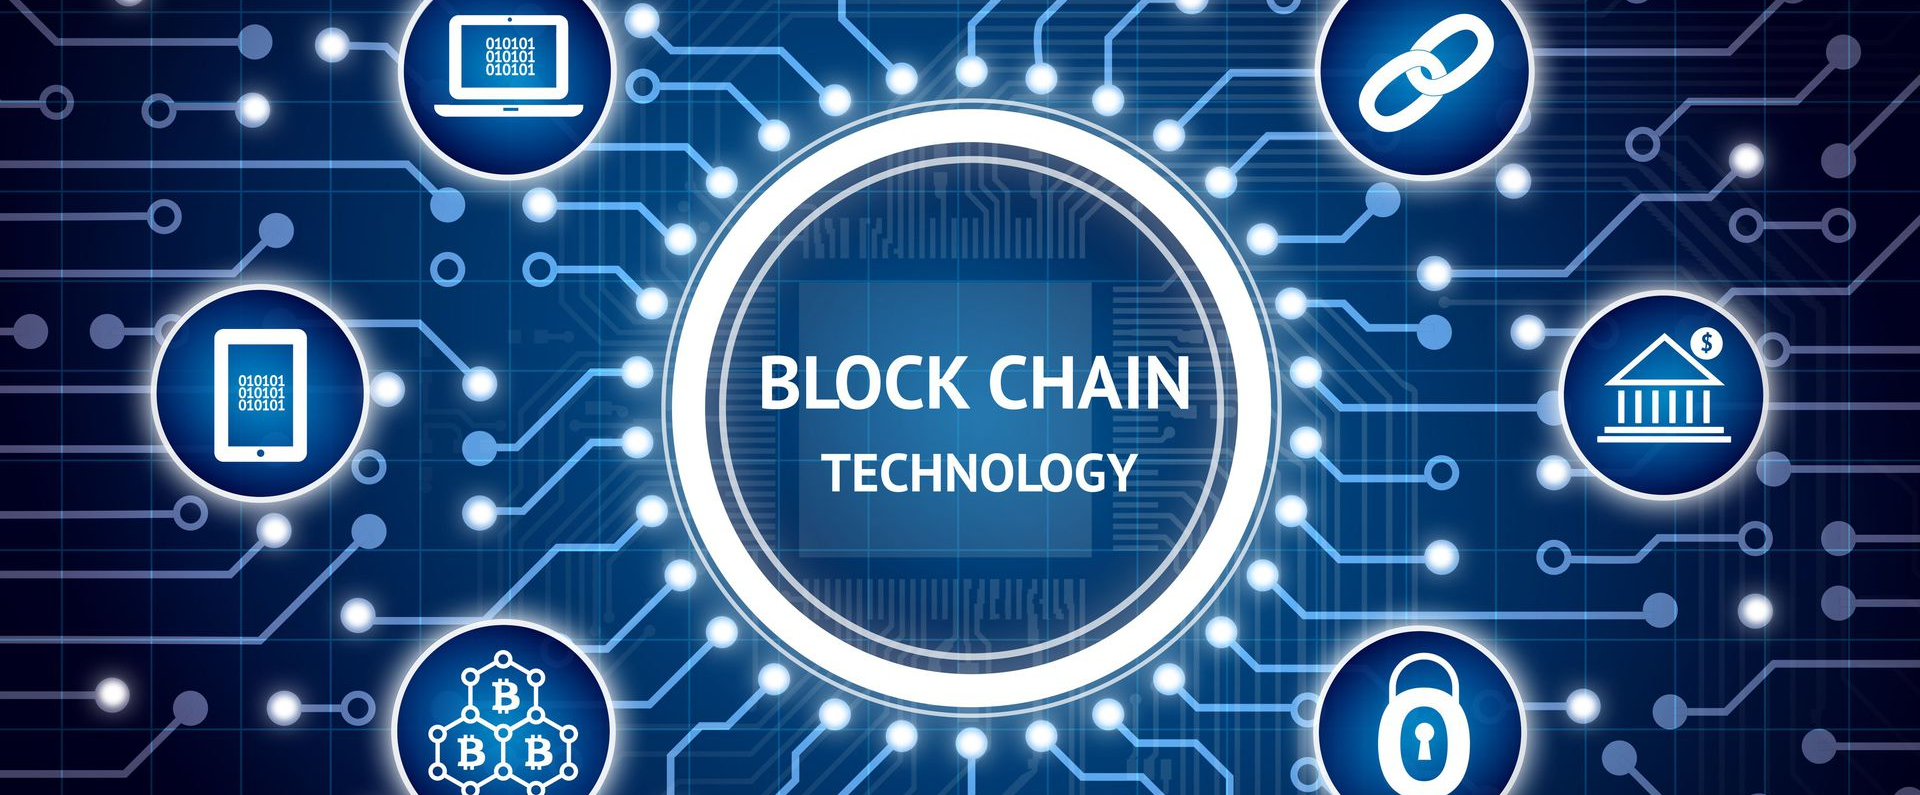 Where can blockchain technology be used?